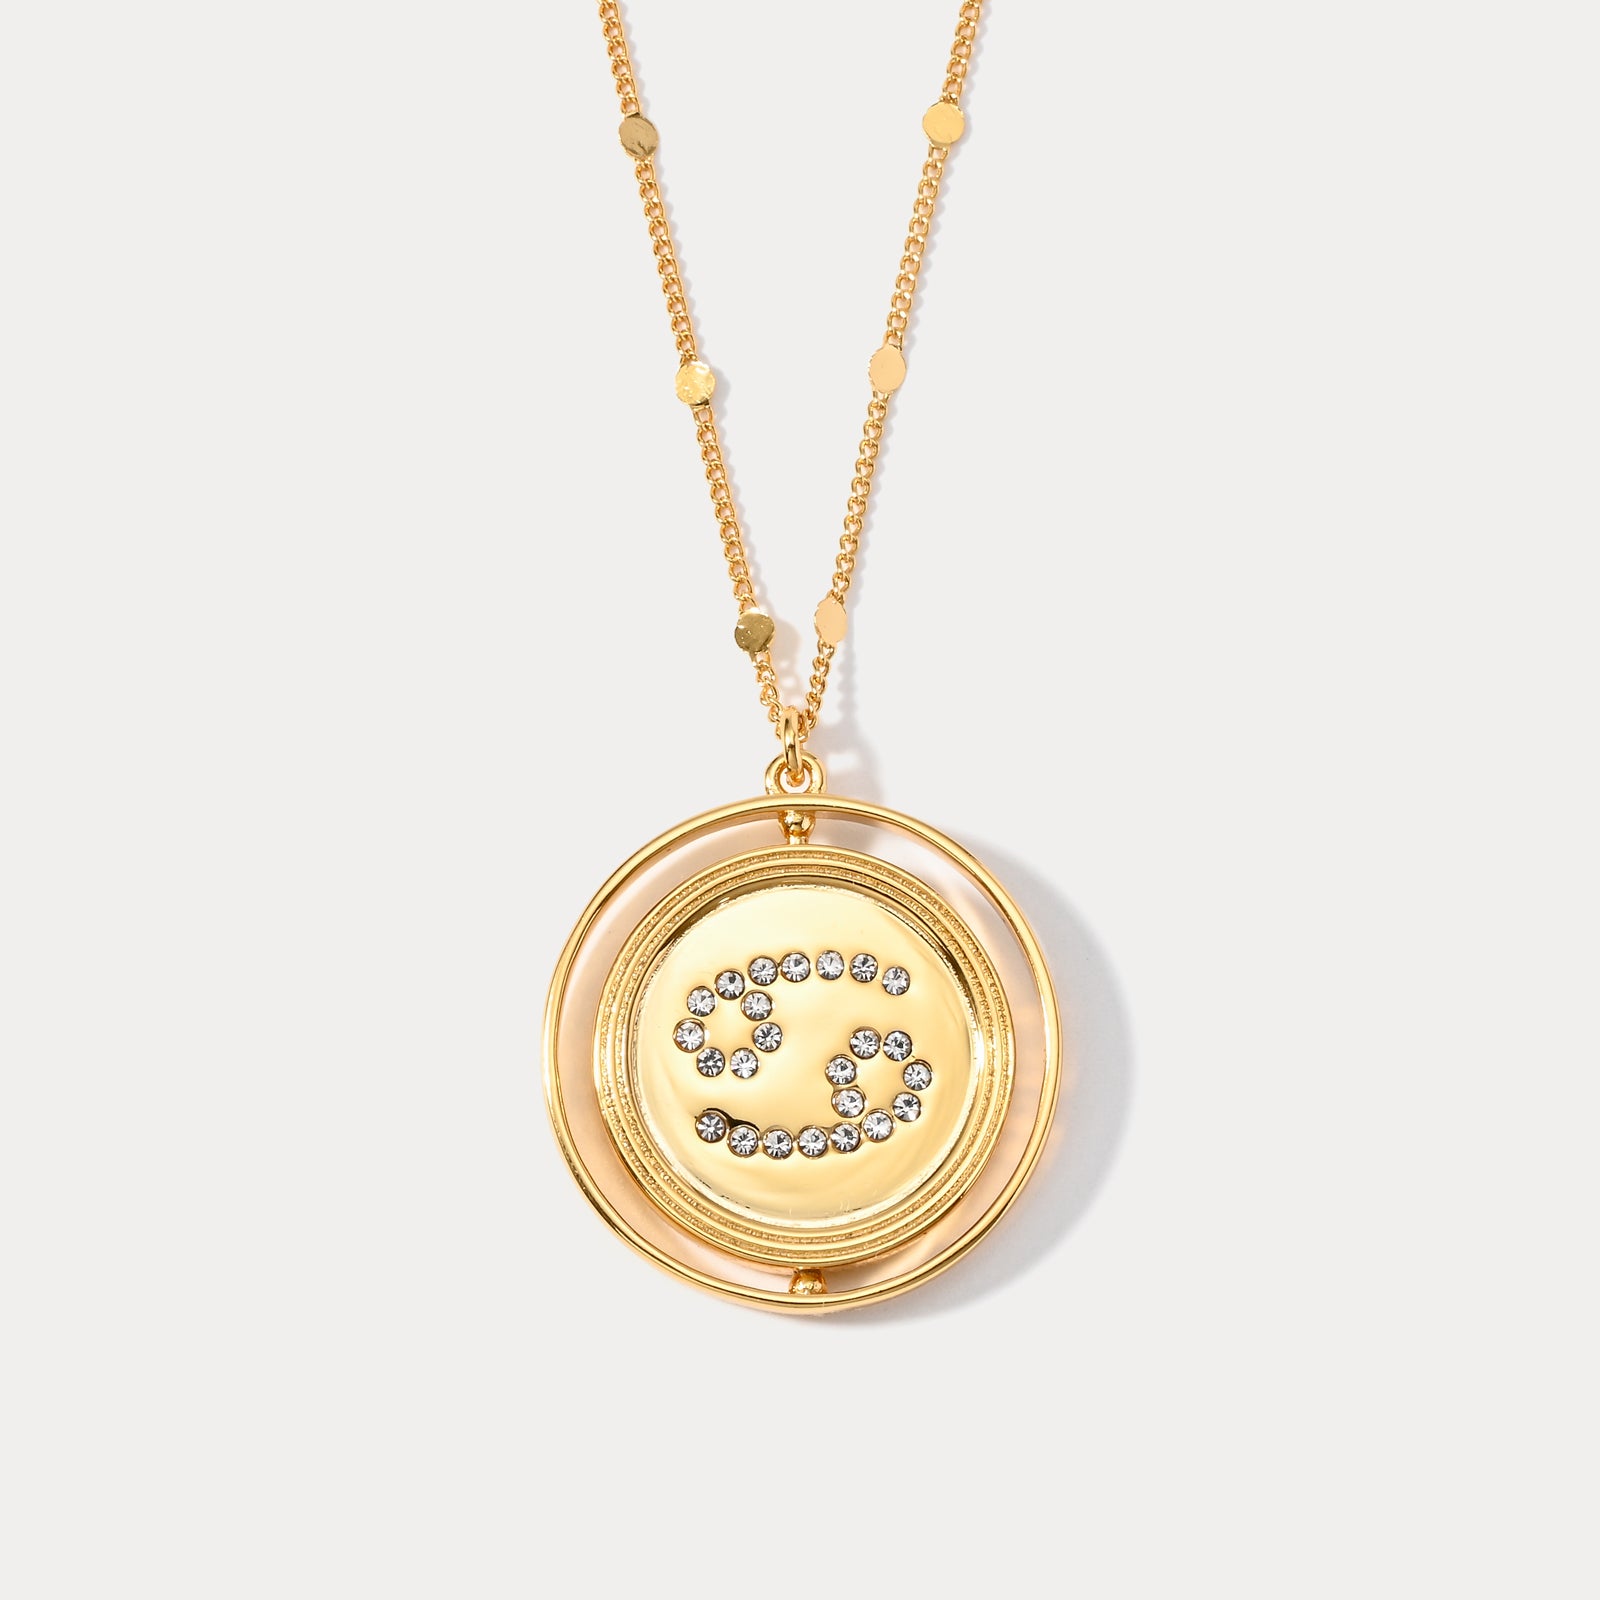 Cancer Zodiac Sign Necklace For Women